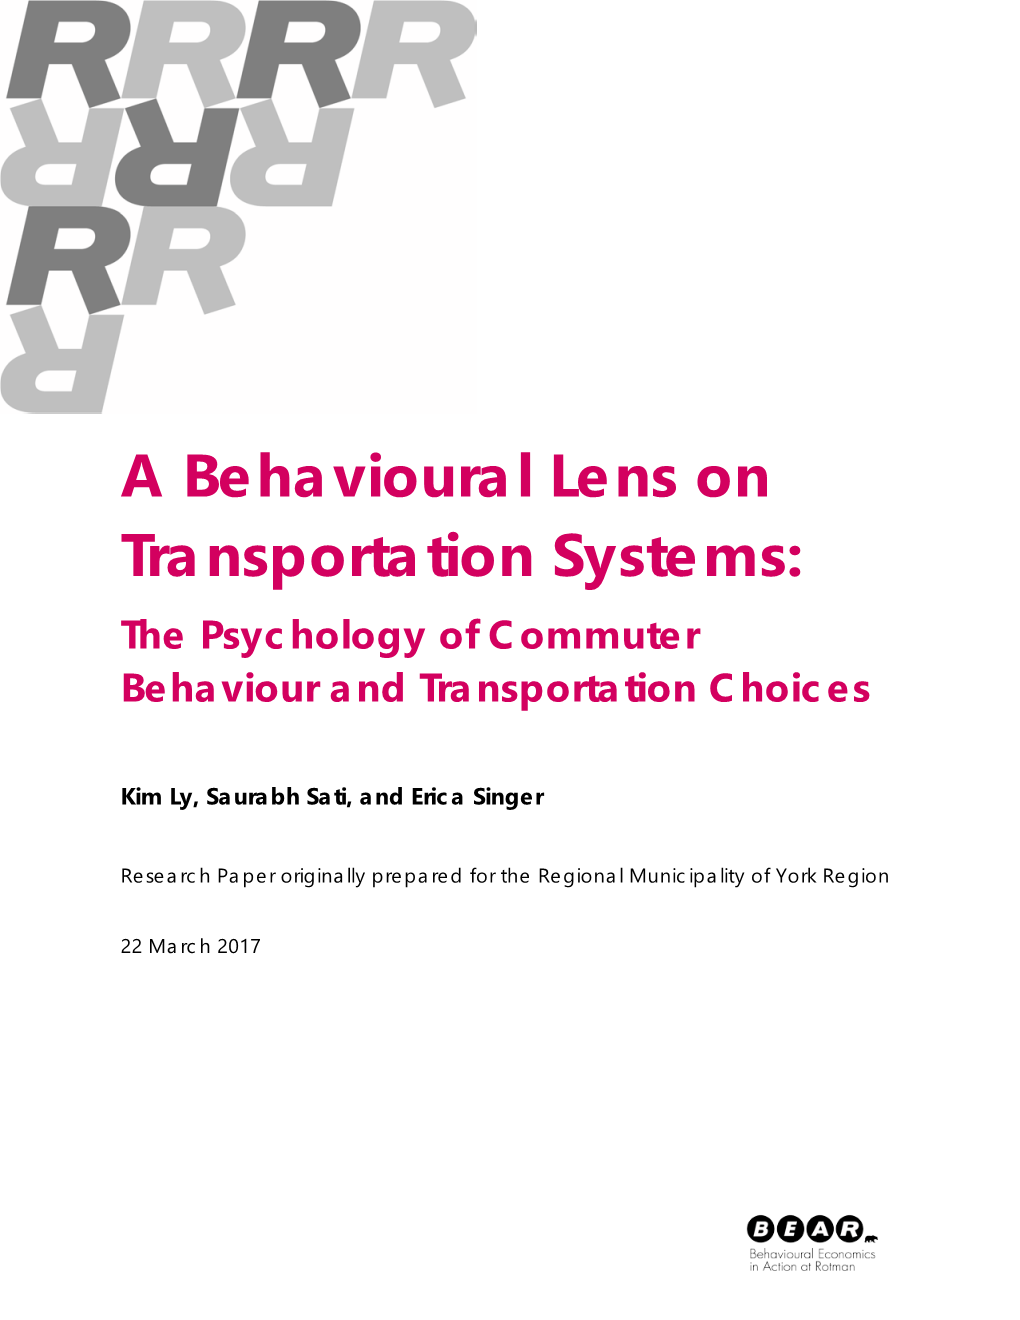 A Behavioural Lens on Transportation Systems: the Psychology of Commuter Behaviour and Transportation Choices